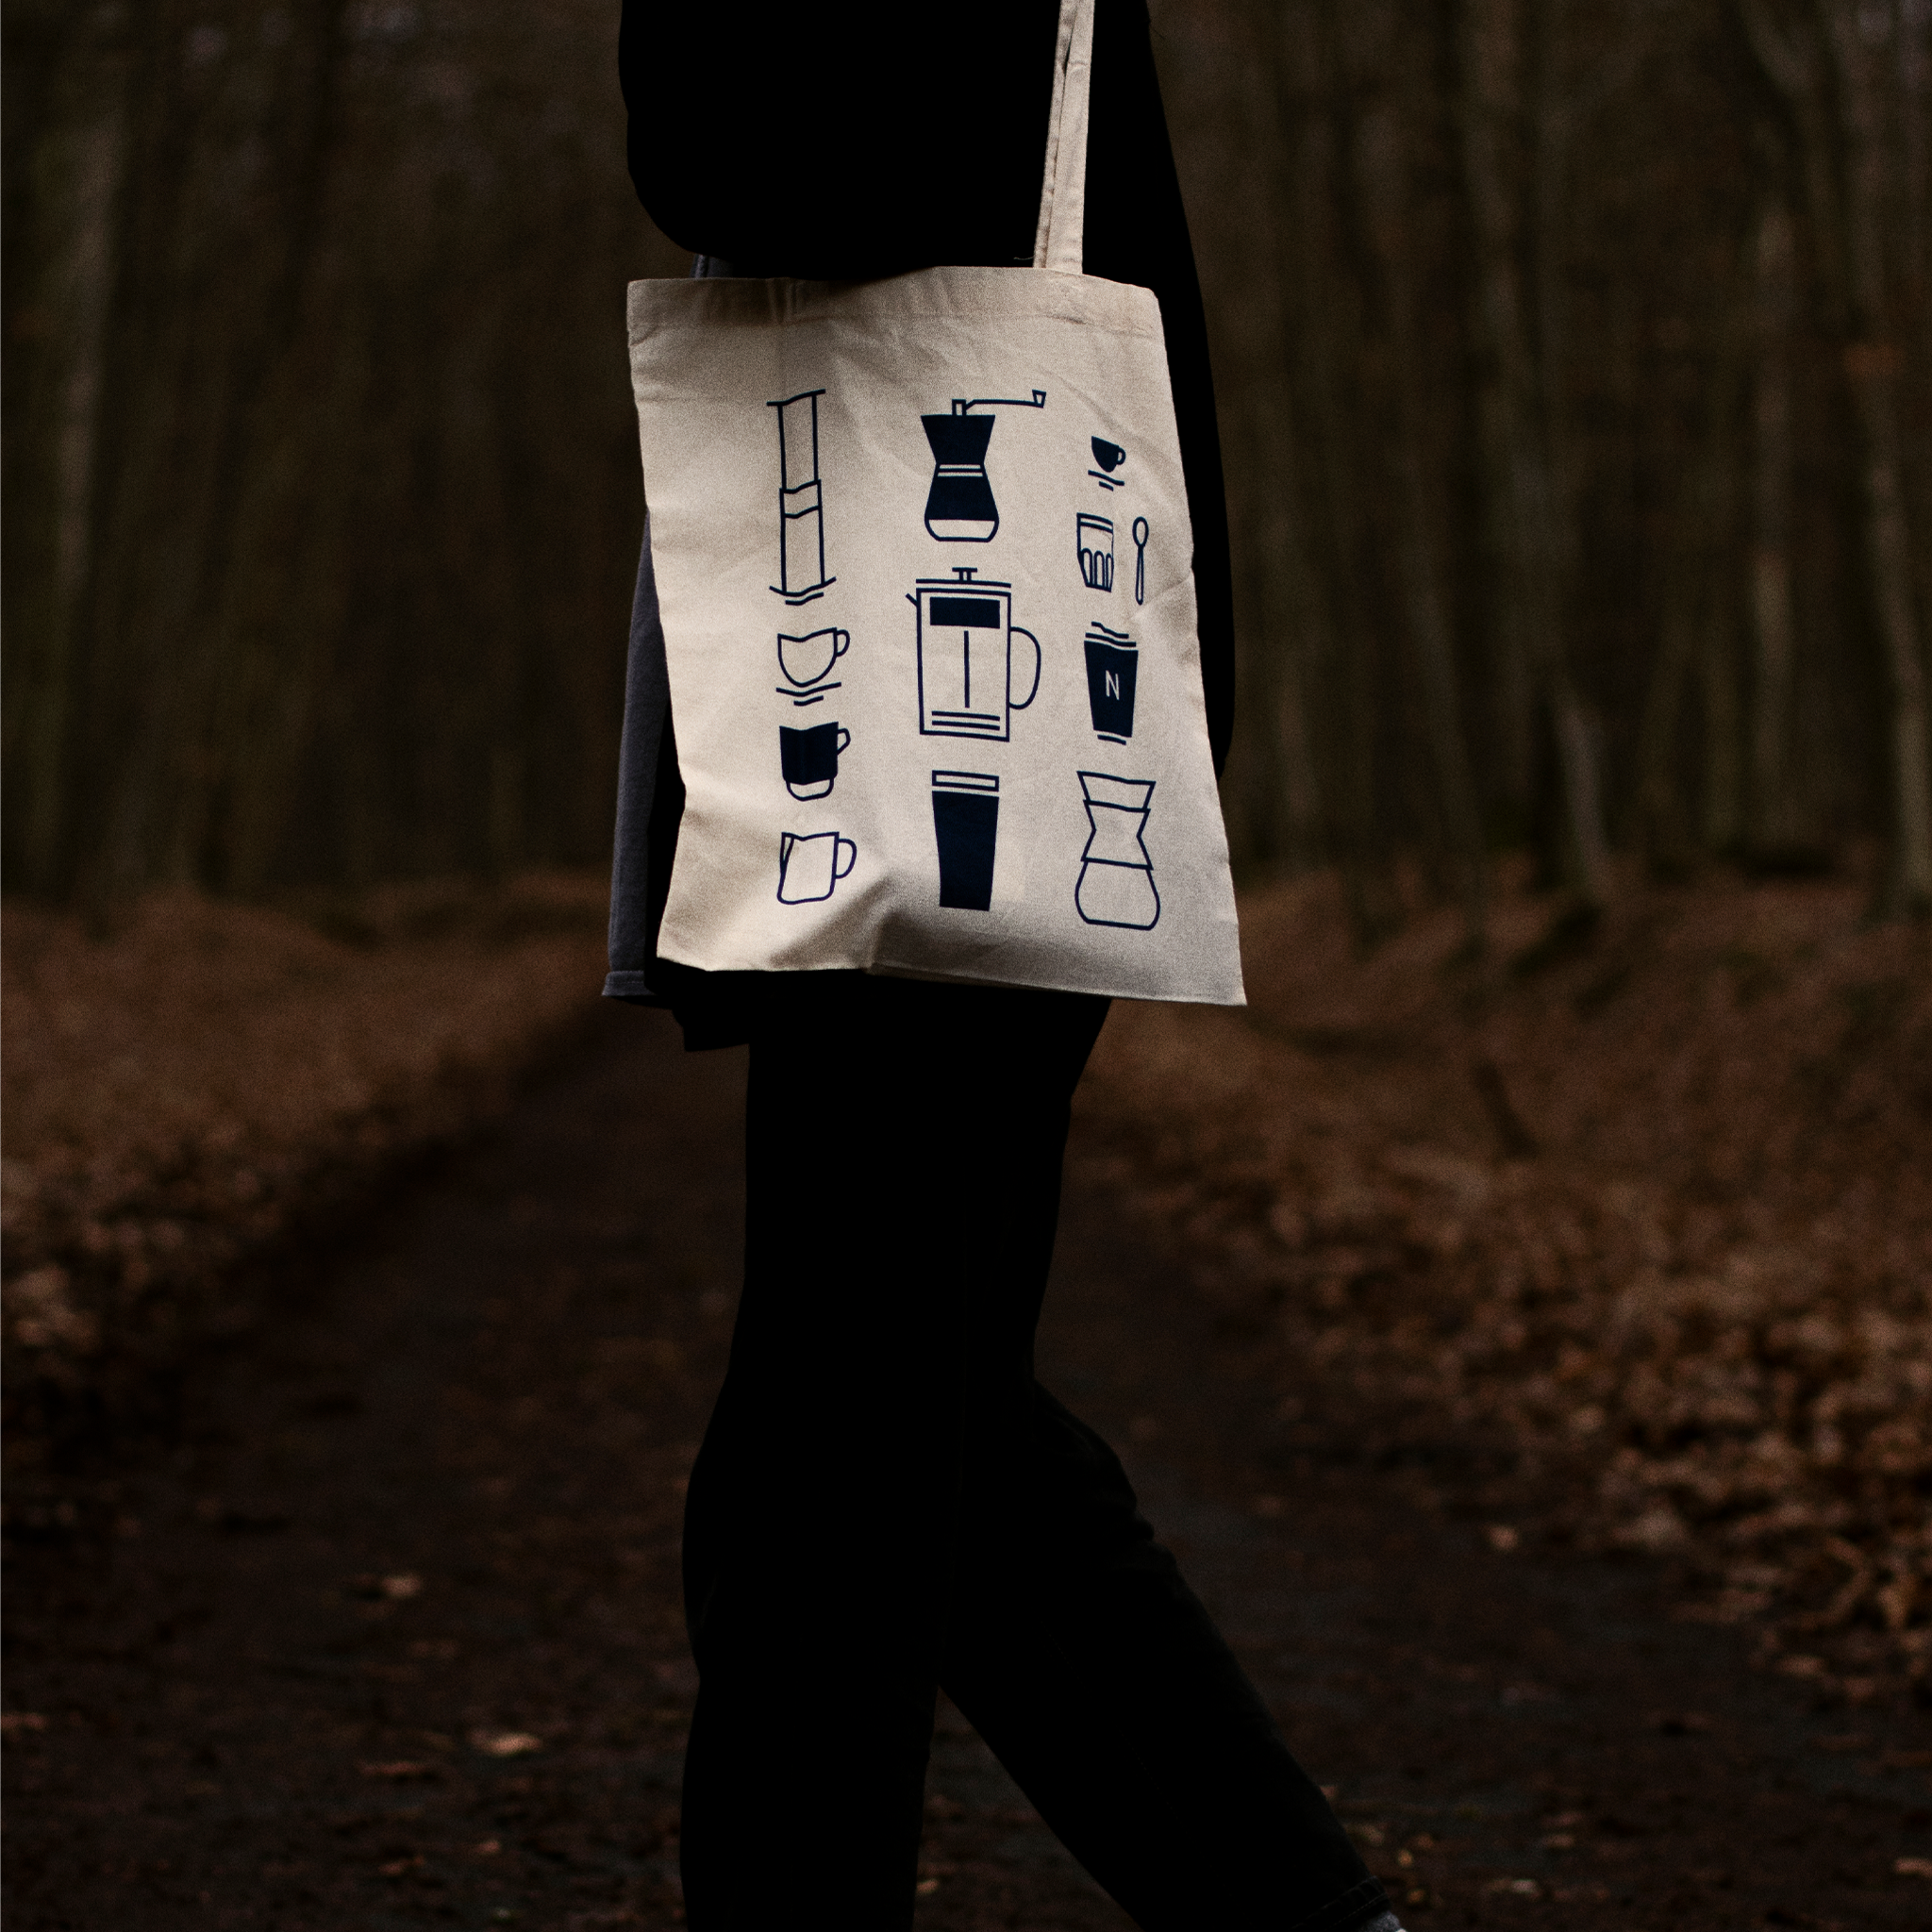 Nelson Coffee Roasters tote bag